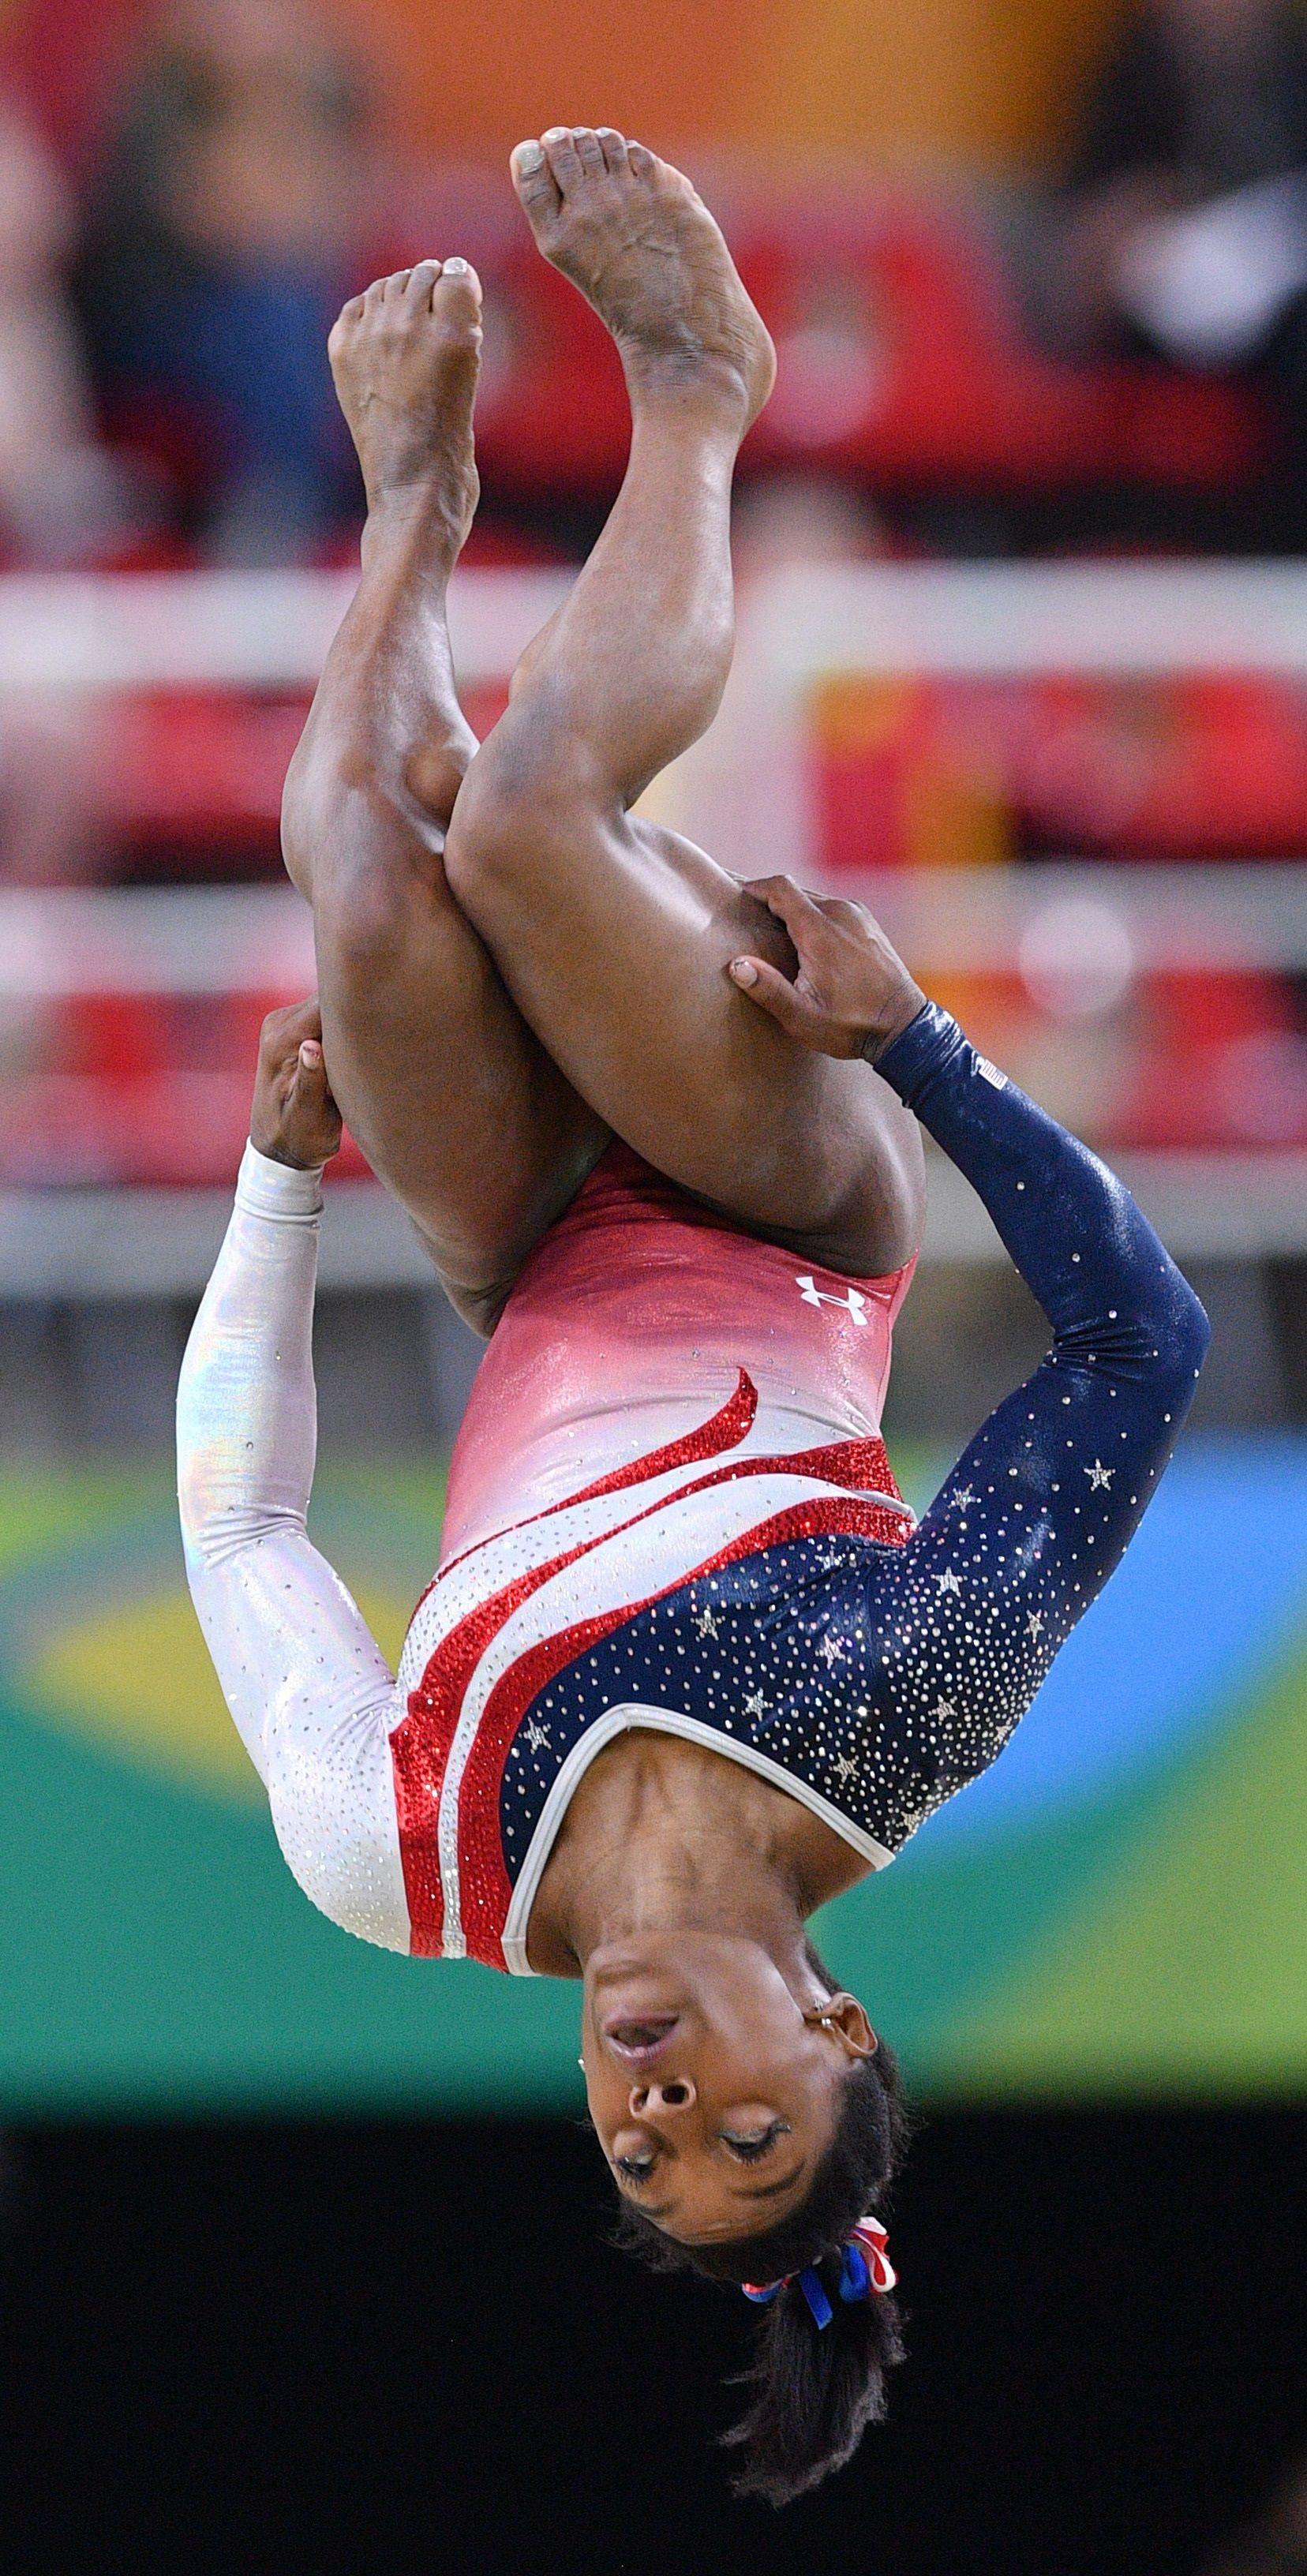 Simone Biles doing her floor routine for the all rounds